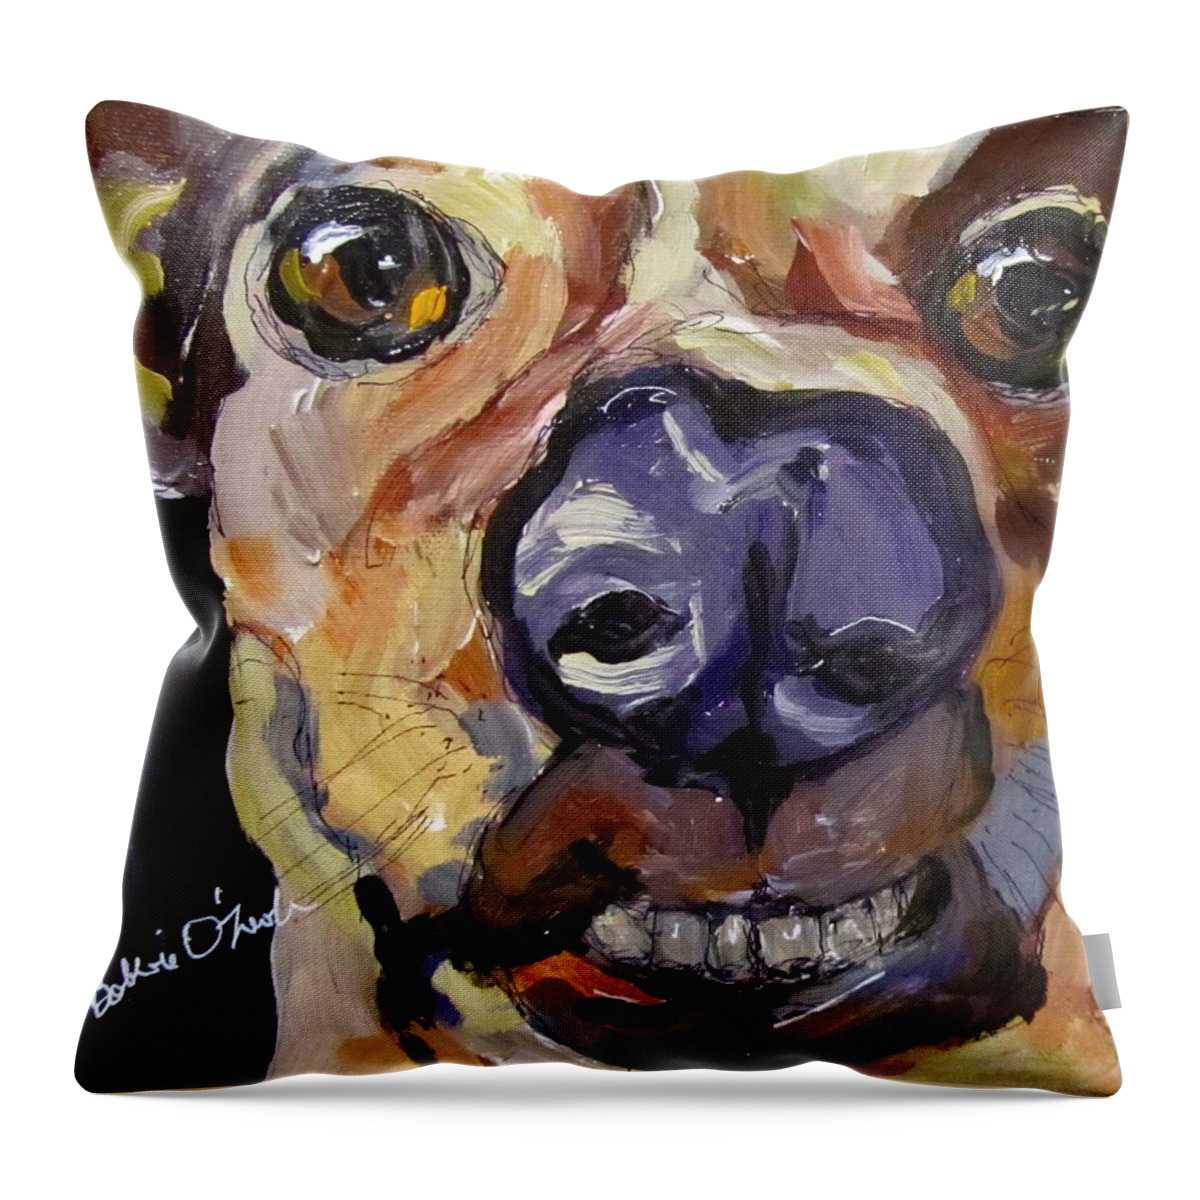 Dog Throw Pillow featuring the painting Dogsdon't smile do they? by Barbara O'Toole